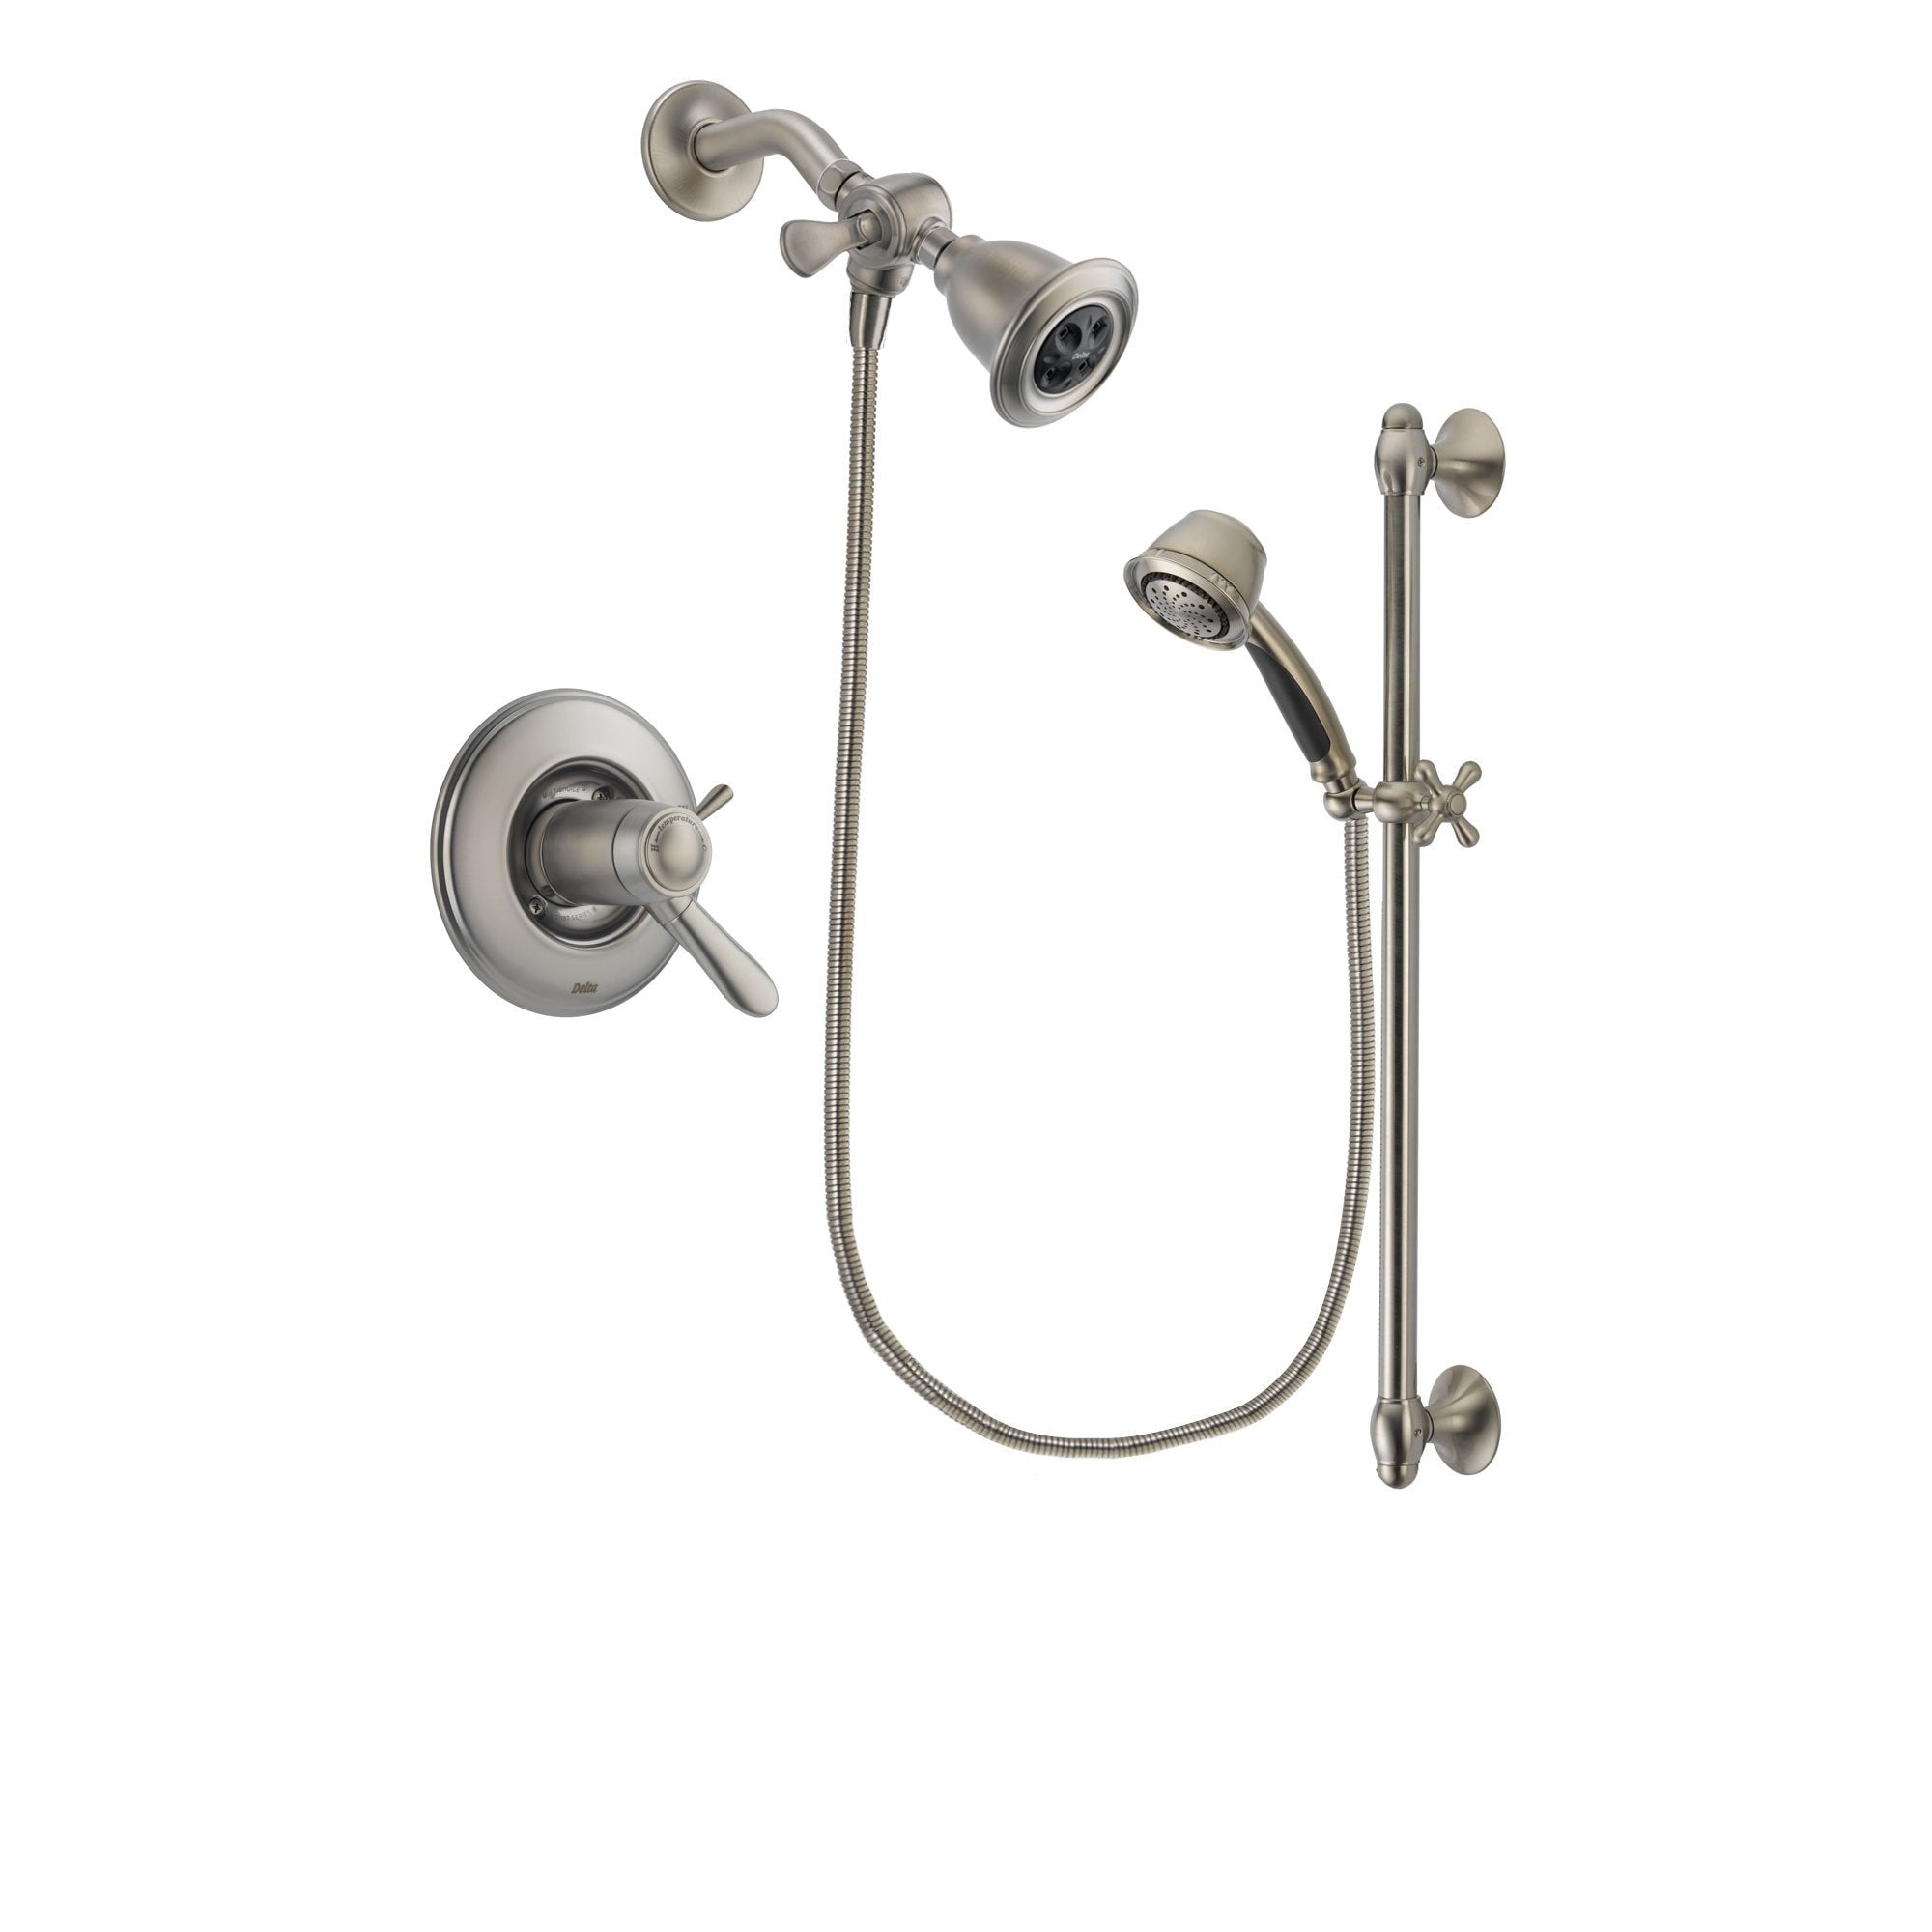 Delta Lahara Stainless Steel Finish Thermostatic Shower Faucet System Package with Water Efficient Showerhead and 5-Spray Personal Handshower with Slide Bar Includes Rough-in Valve DSP1276V